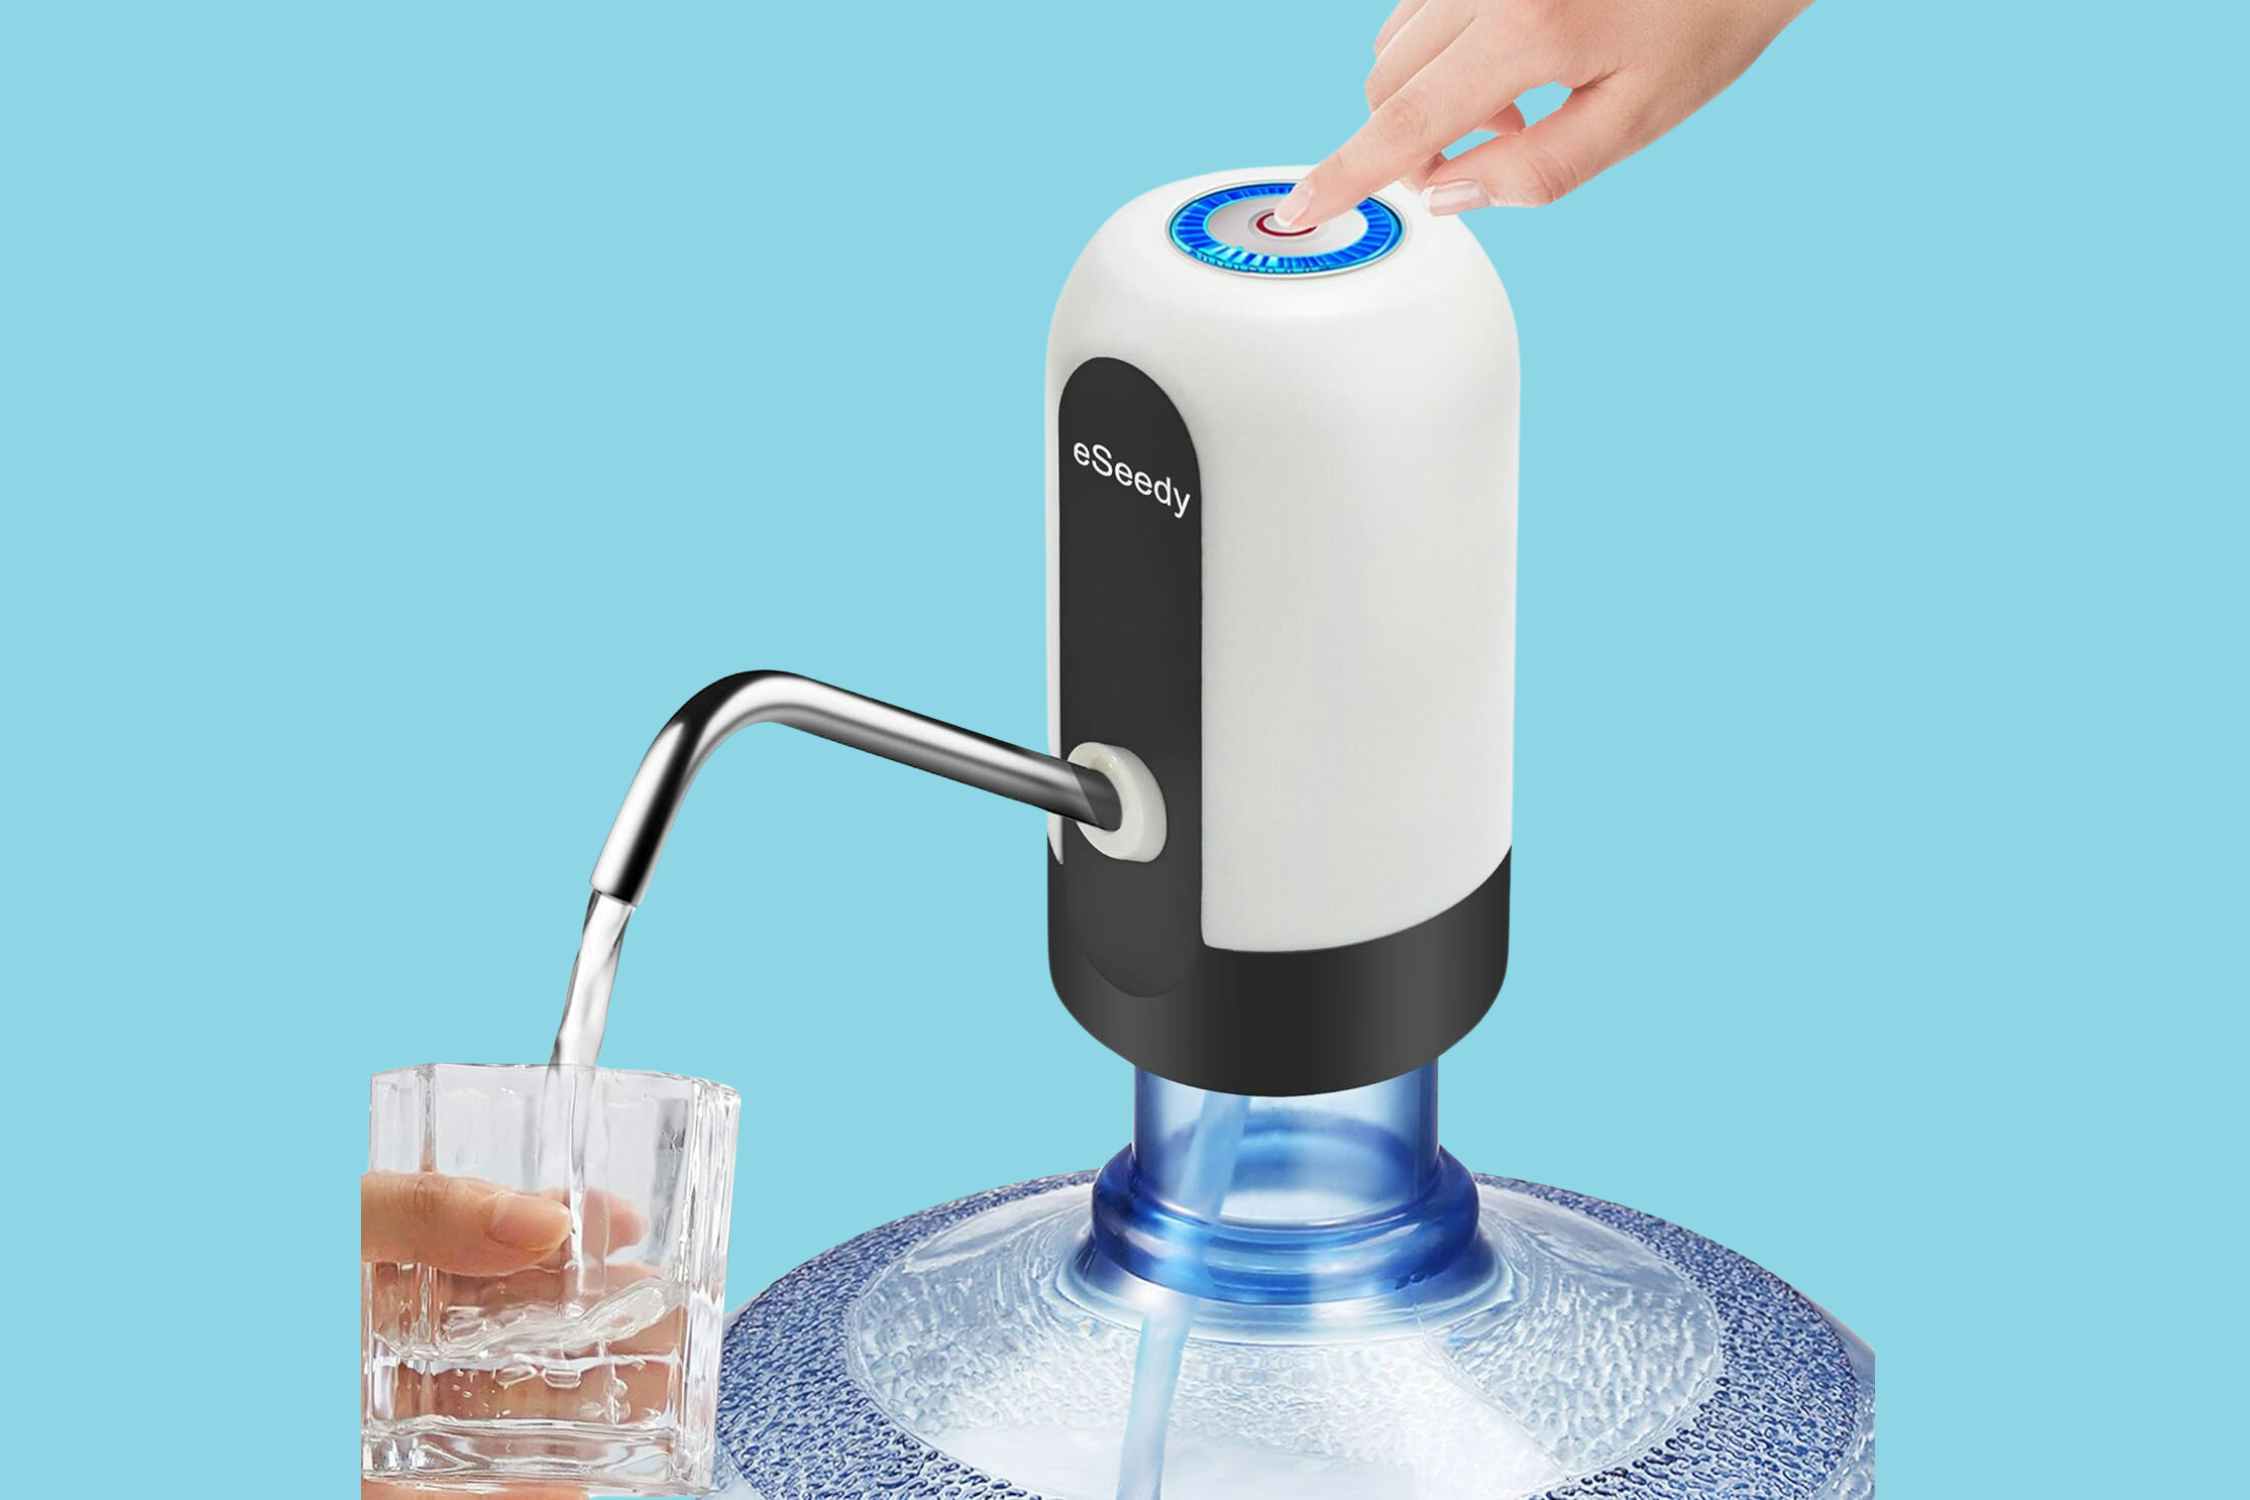 Automatic Electric Drinking Water Pump, Just $7.49 on Amazon (Reg. $17)